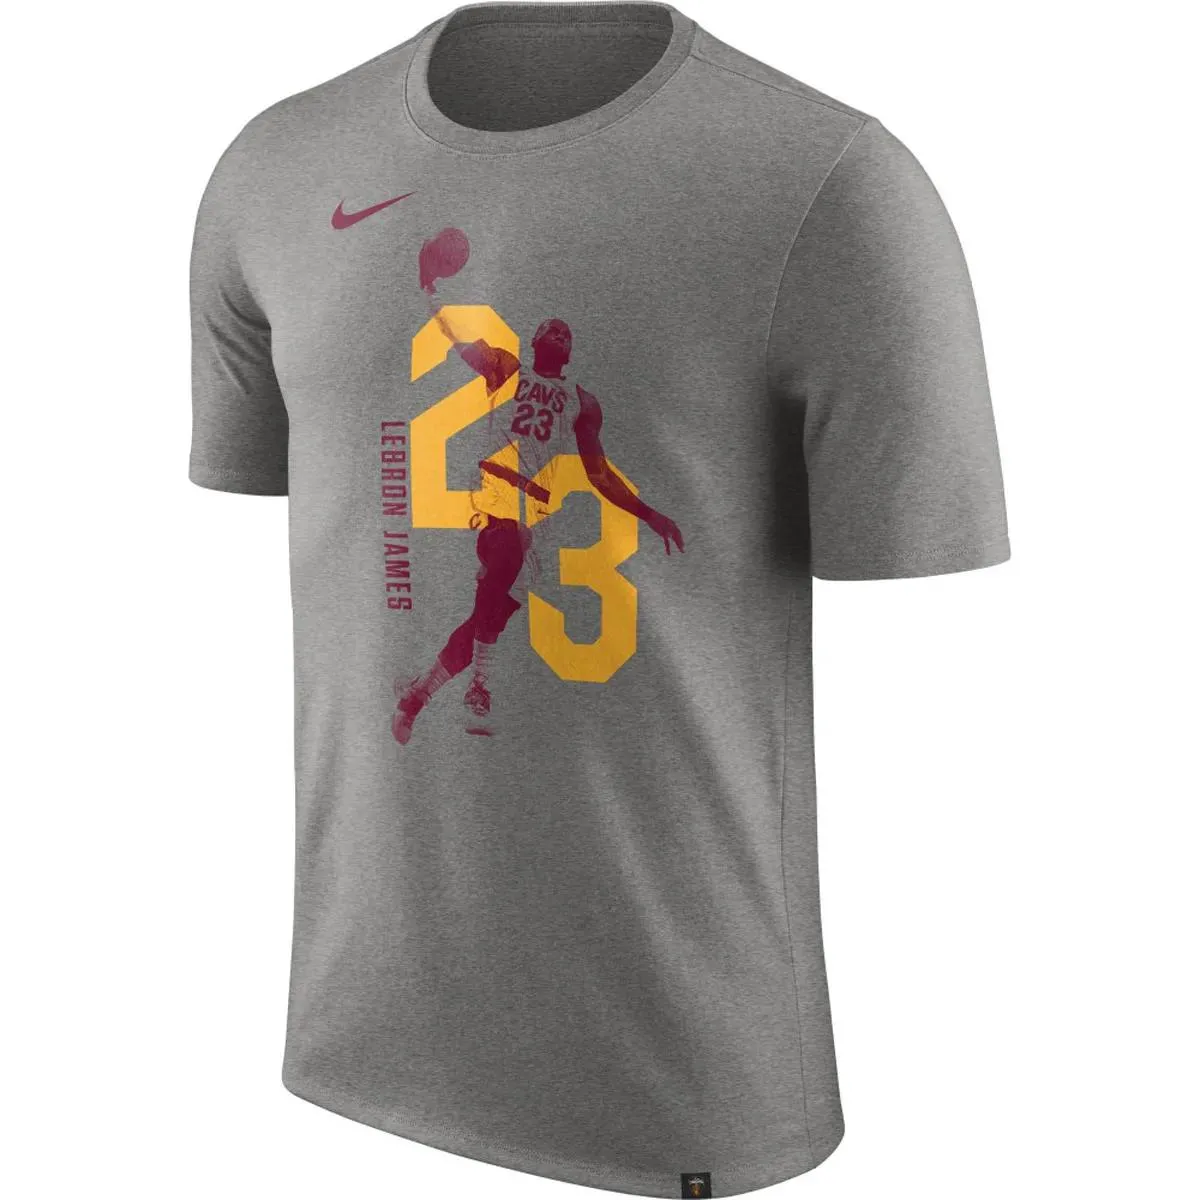 Nike T-shirt CLE M NK DRY TEE EXP PLAYER 